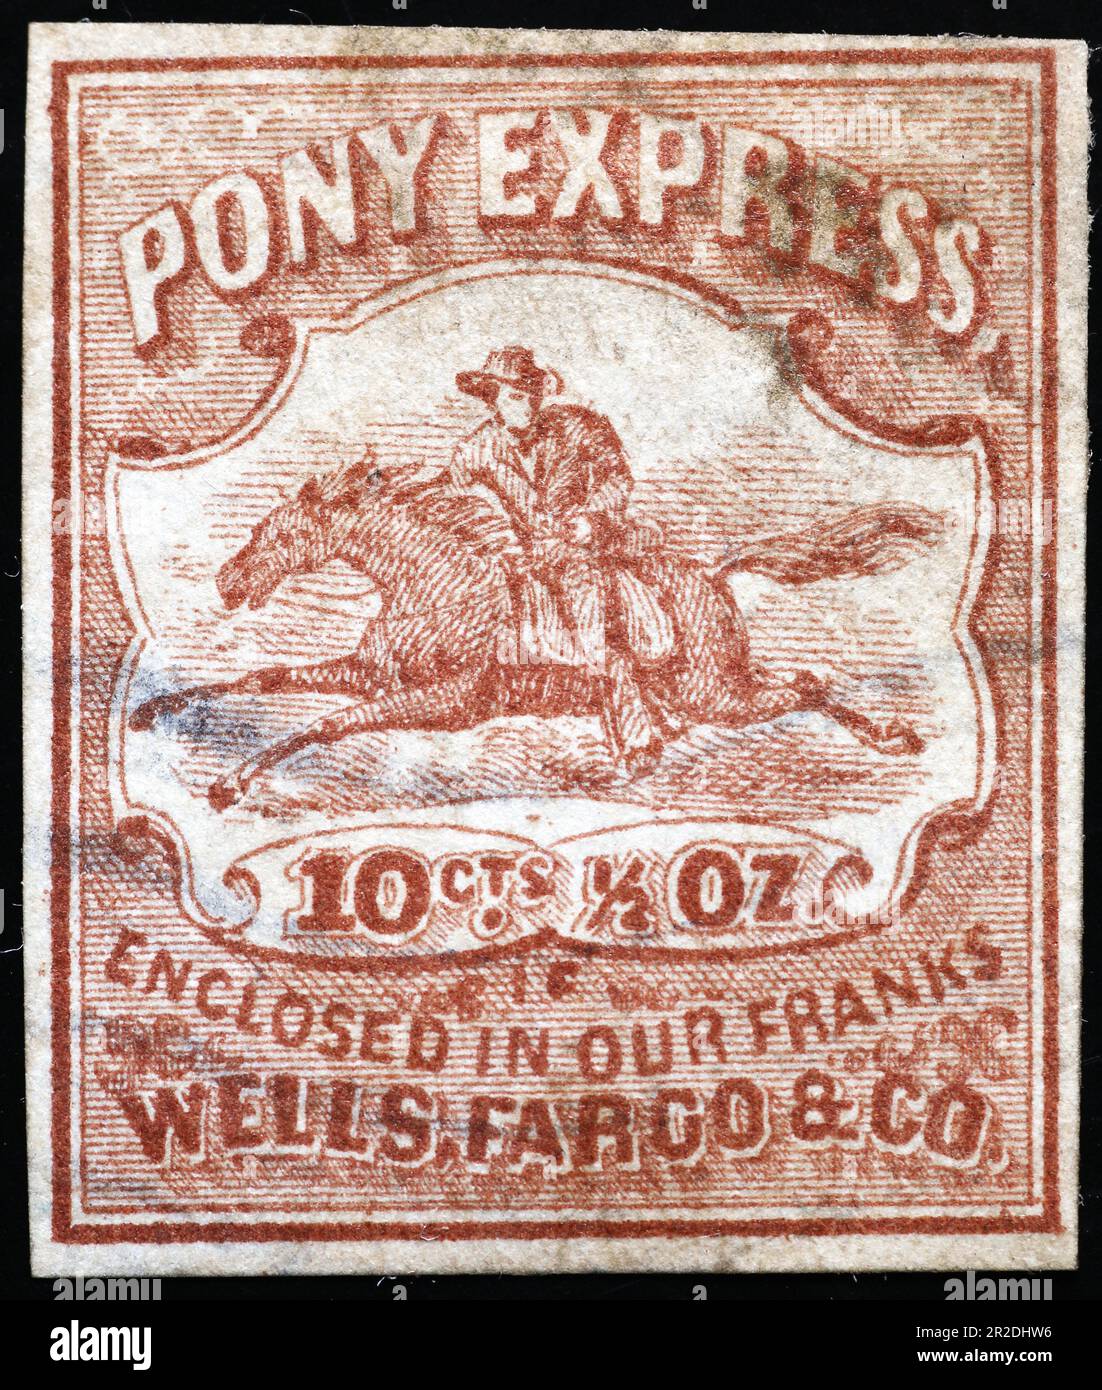 10 Pony Express Postage Stamps / Western Cowboy Mail Delivery Vintage  Postage Stamps for Mailing